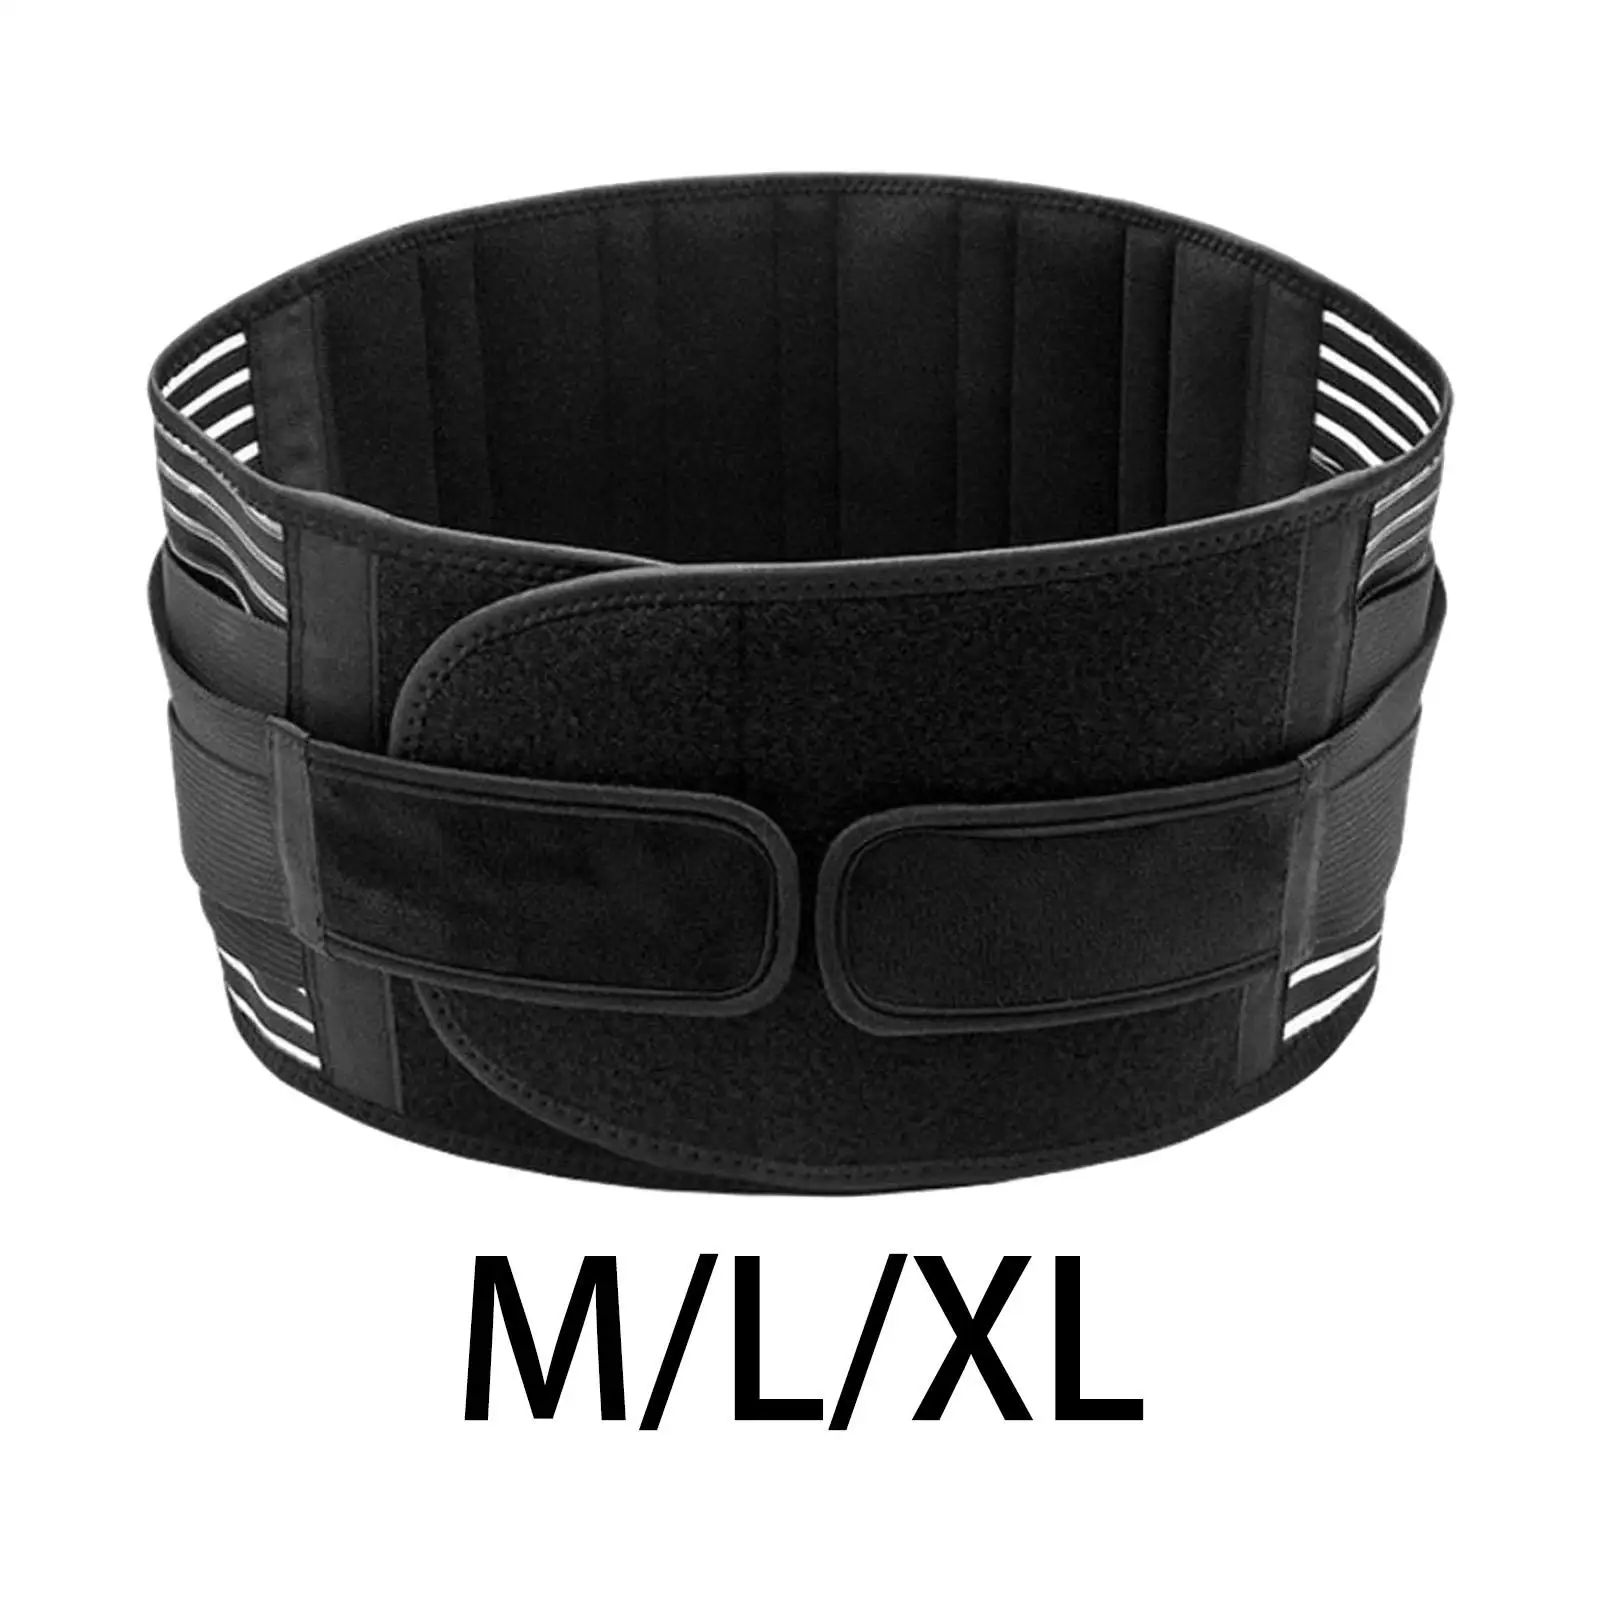 

Back Support Belt 6 Supporting Rods Belly Band Lumbar Support Wasit Brace for Waist Pain Lower Back Brace Mesh Elasticity Black